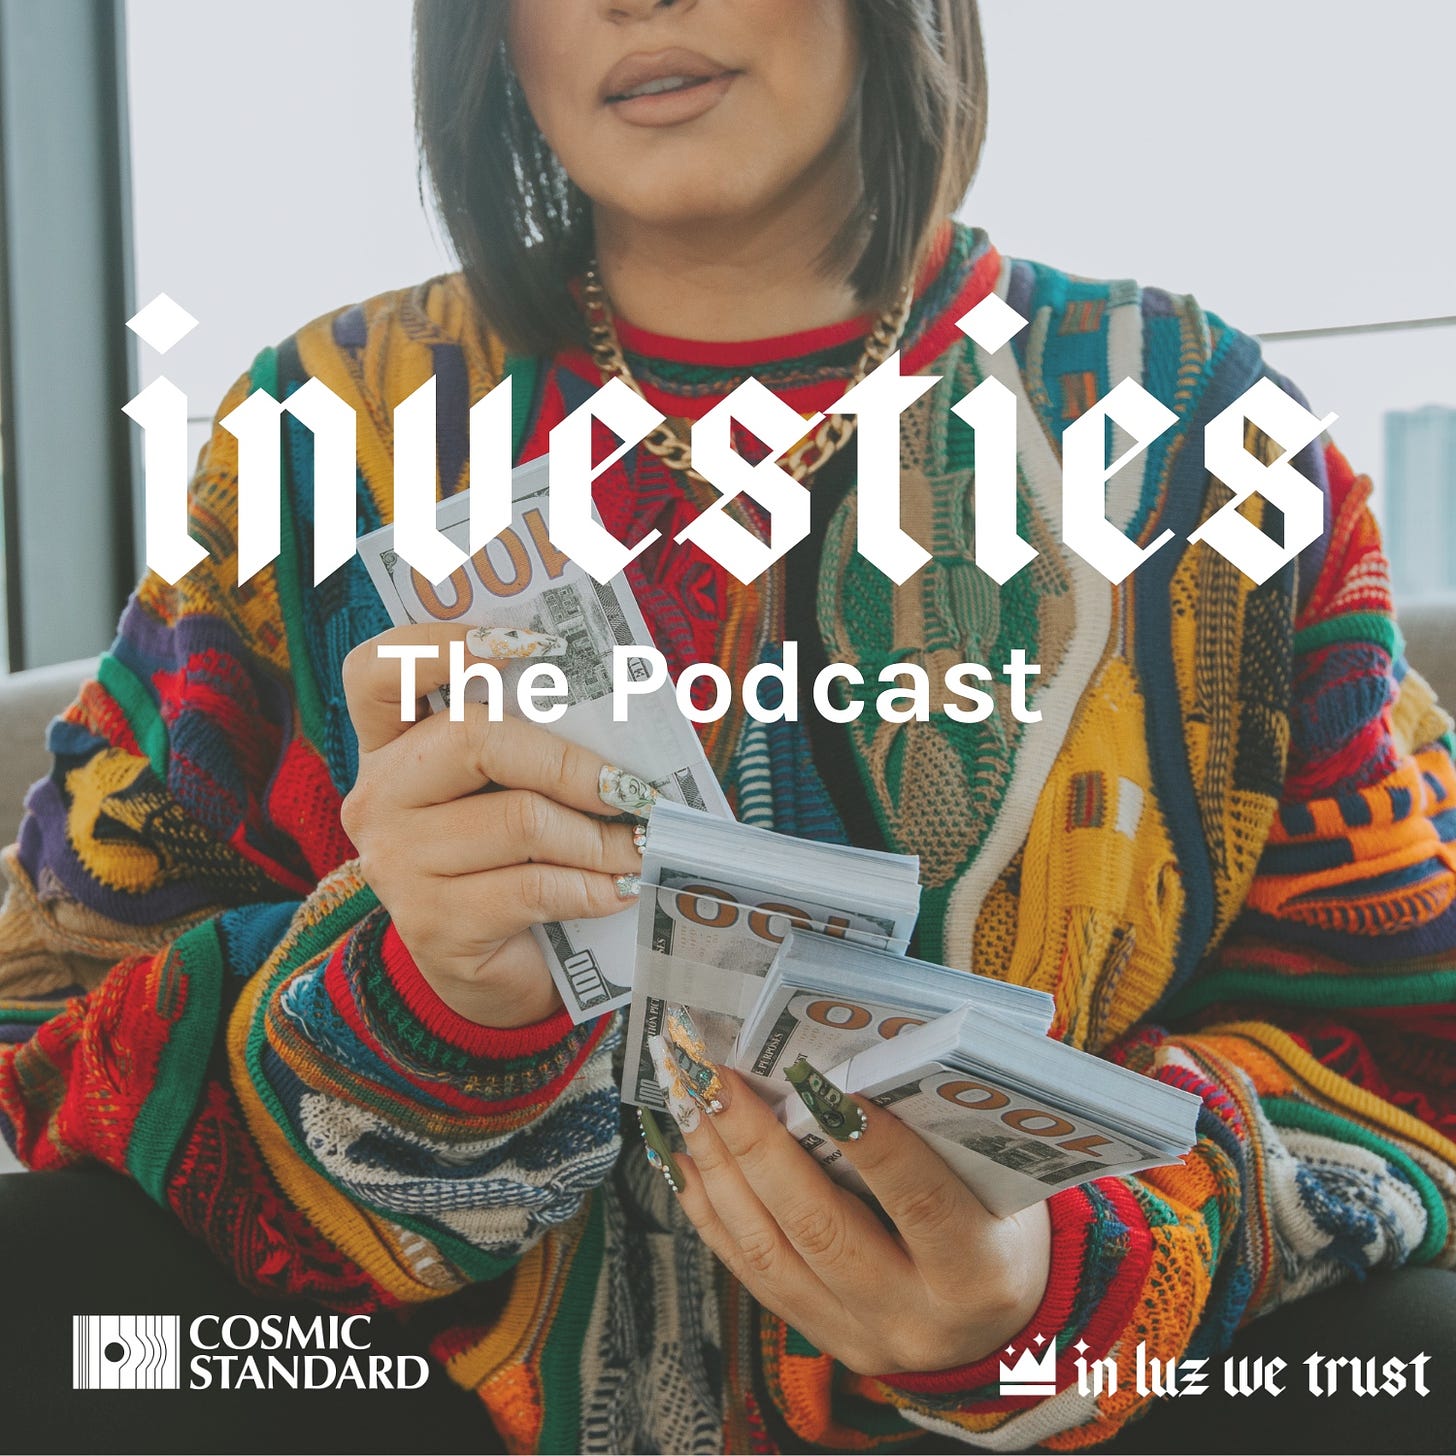 Investies the podcast cover art